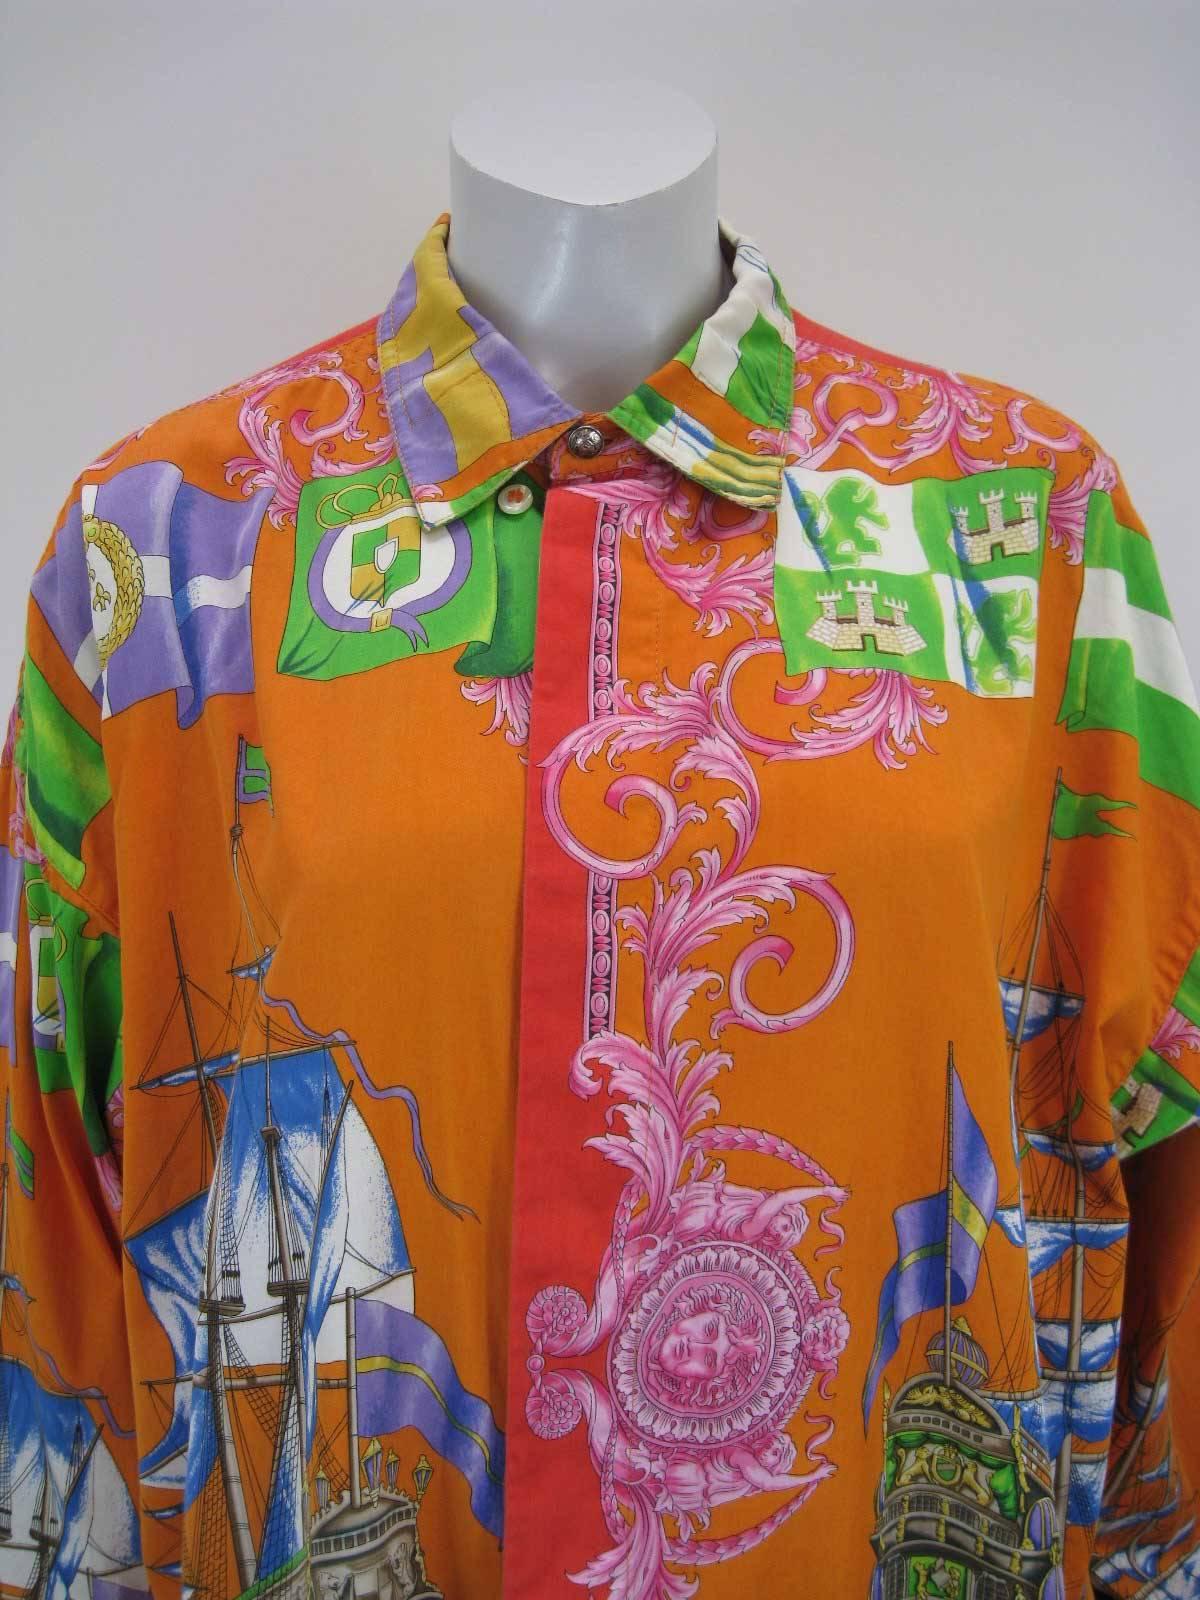 Striking Gianni Versace button down shirt.

Decorative print of sailboats, sun faces, flags and more.

Vibrant hues of orange, yellow, red, blue, green, pink and more.

Button down collar.

Hidden button placket.

Fabric is cotton.

Button